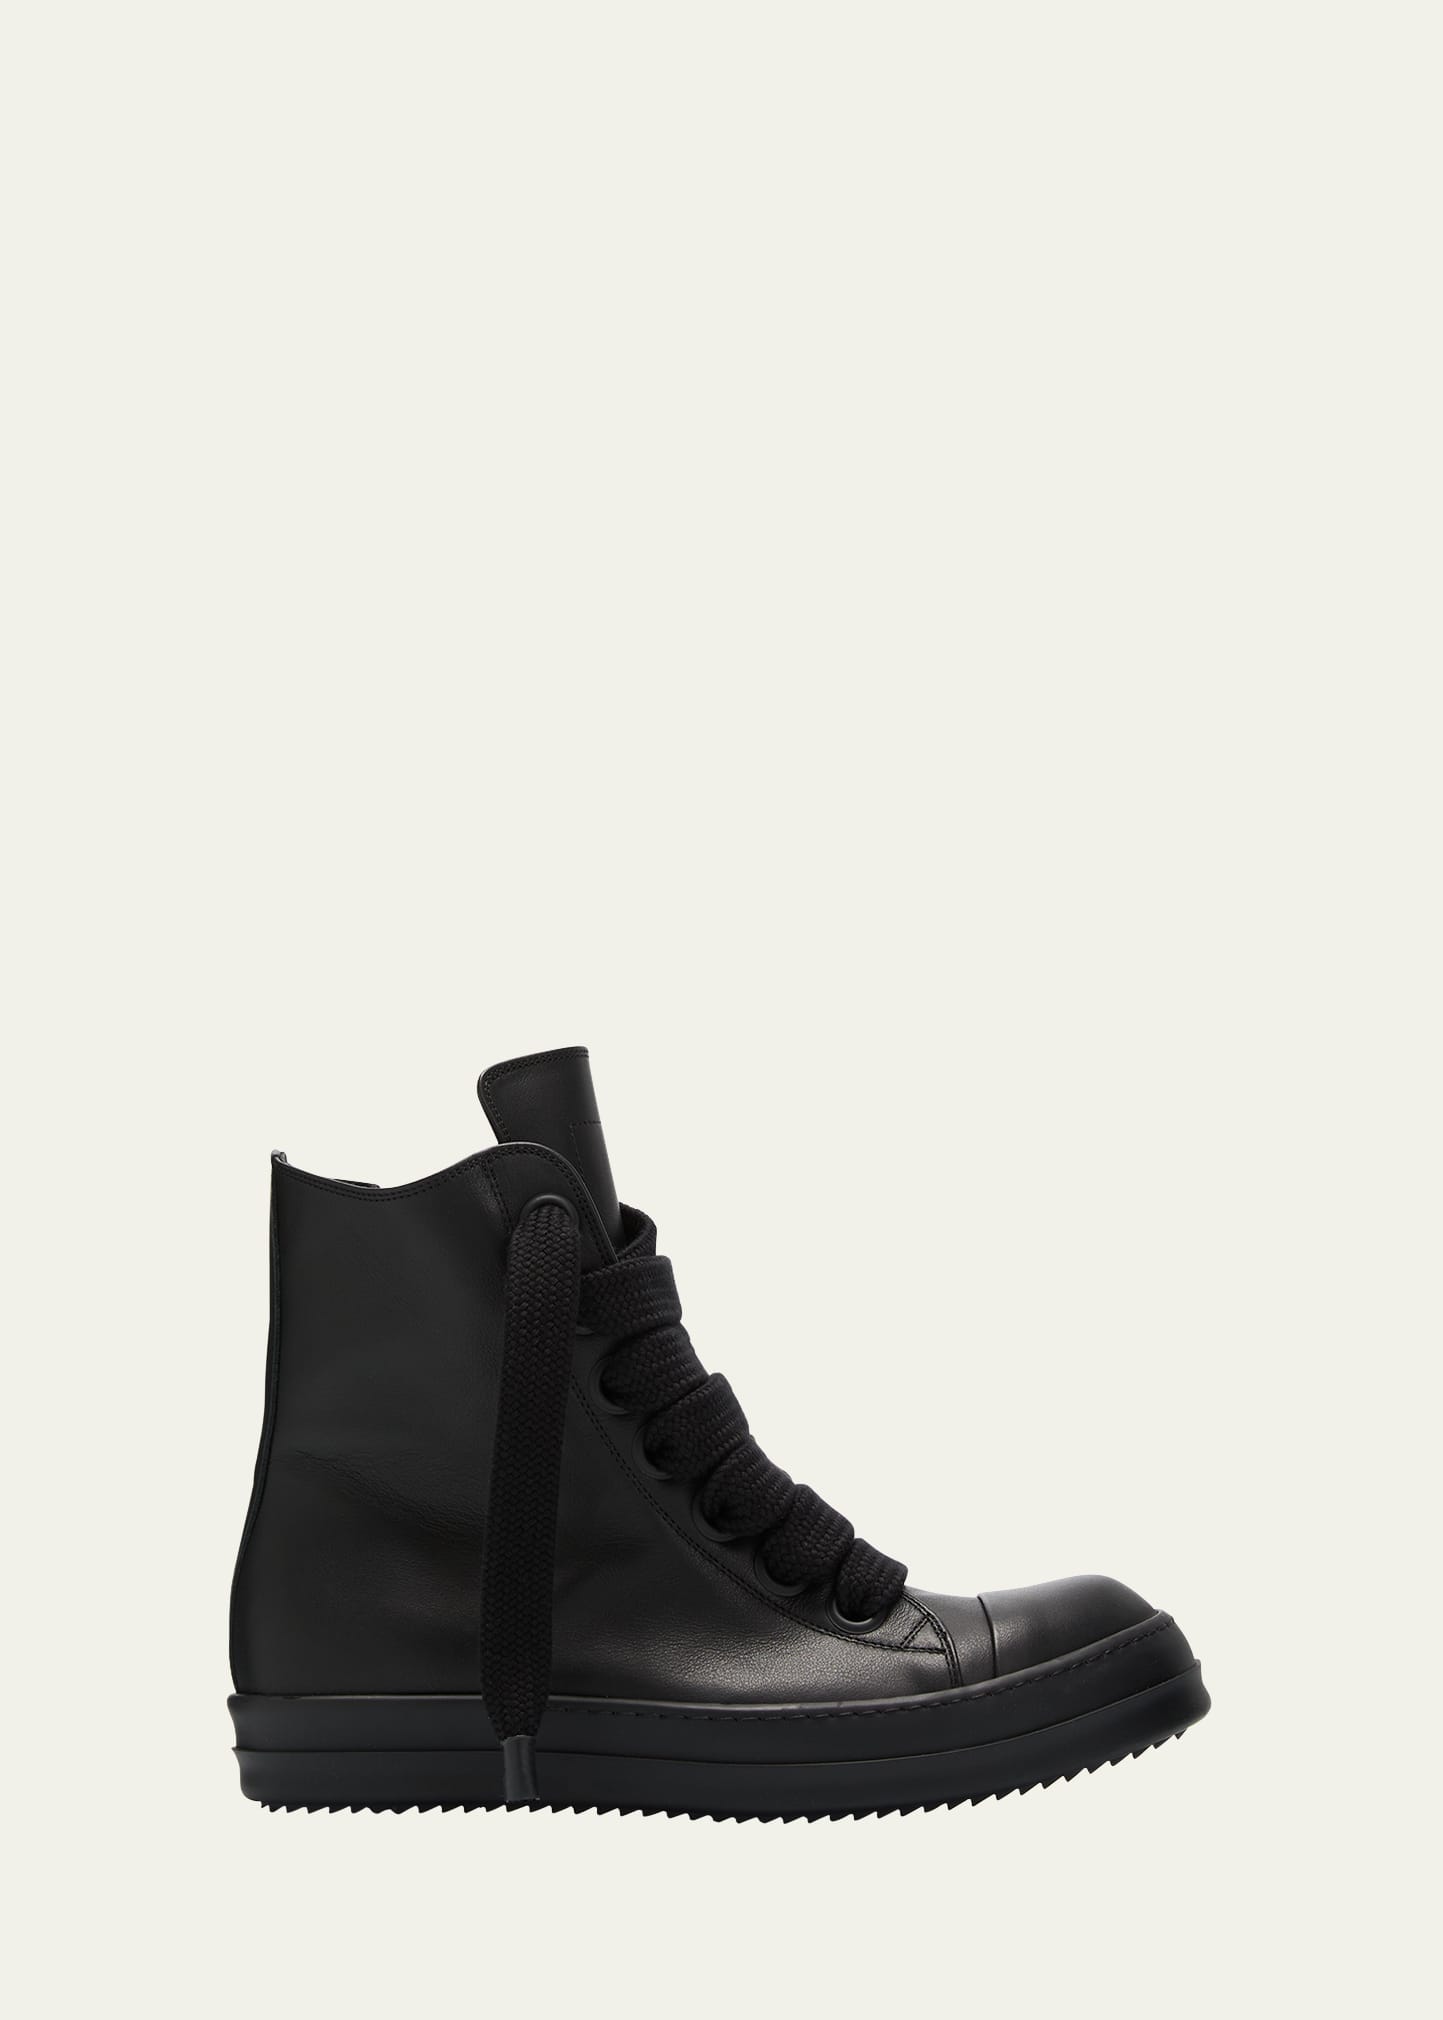 Men's Jumbo Laced Leather High-Top Sneakers